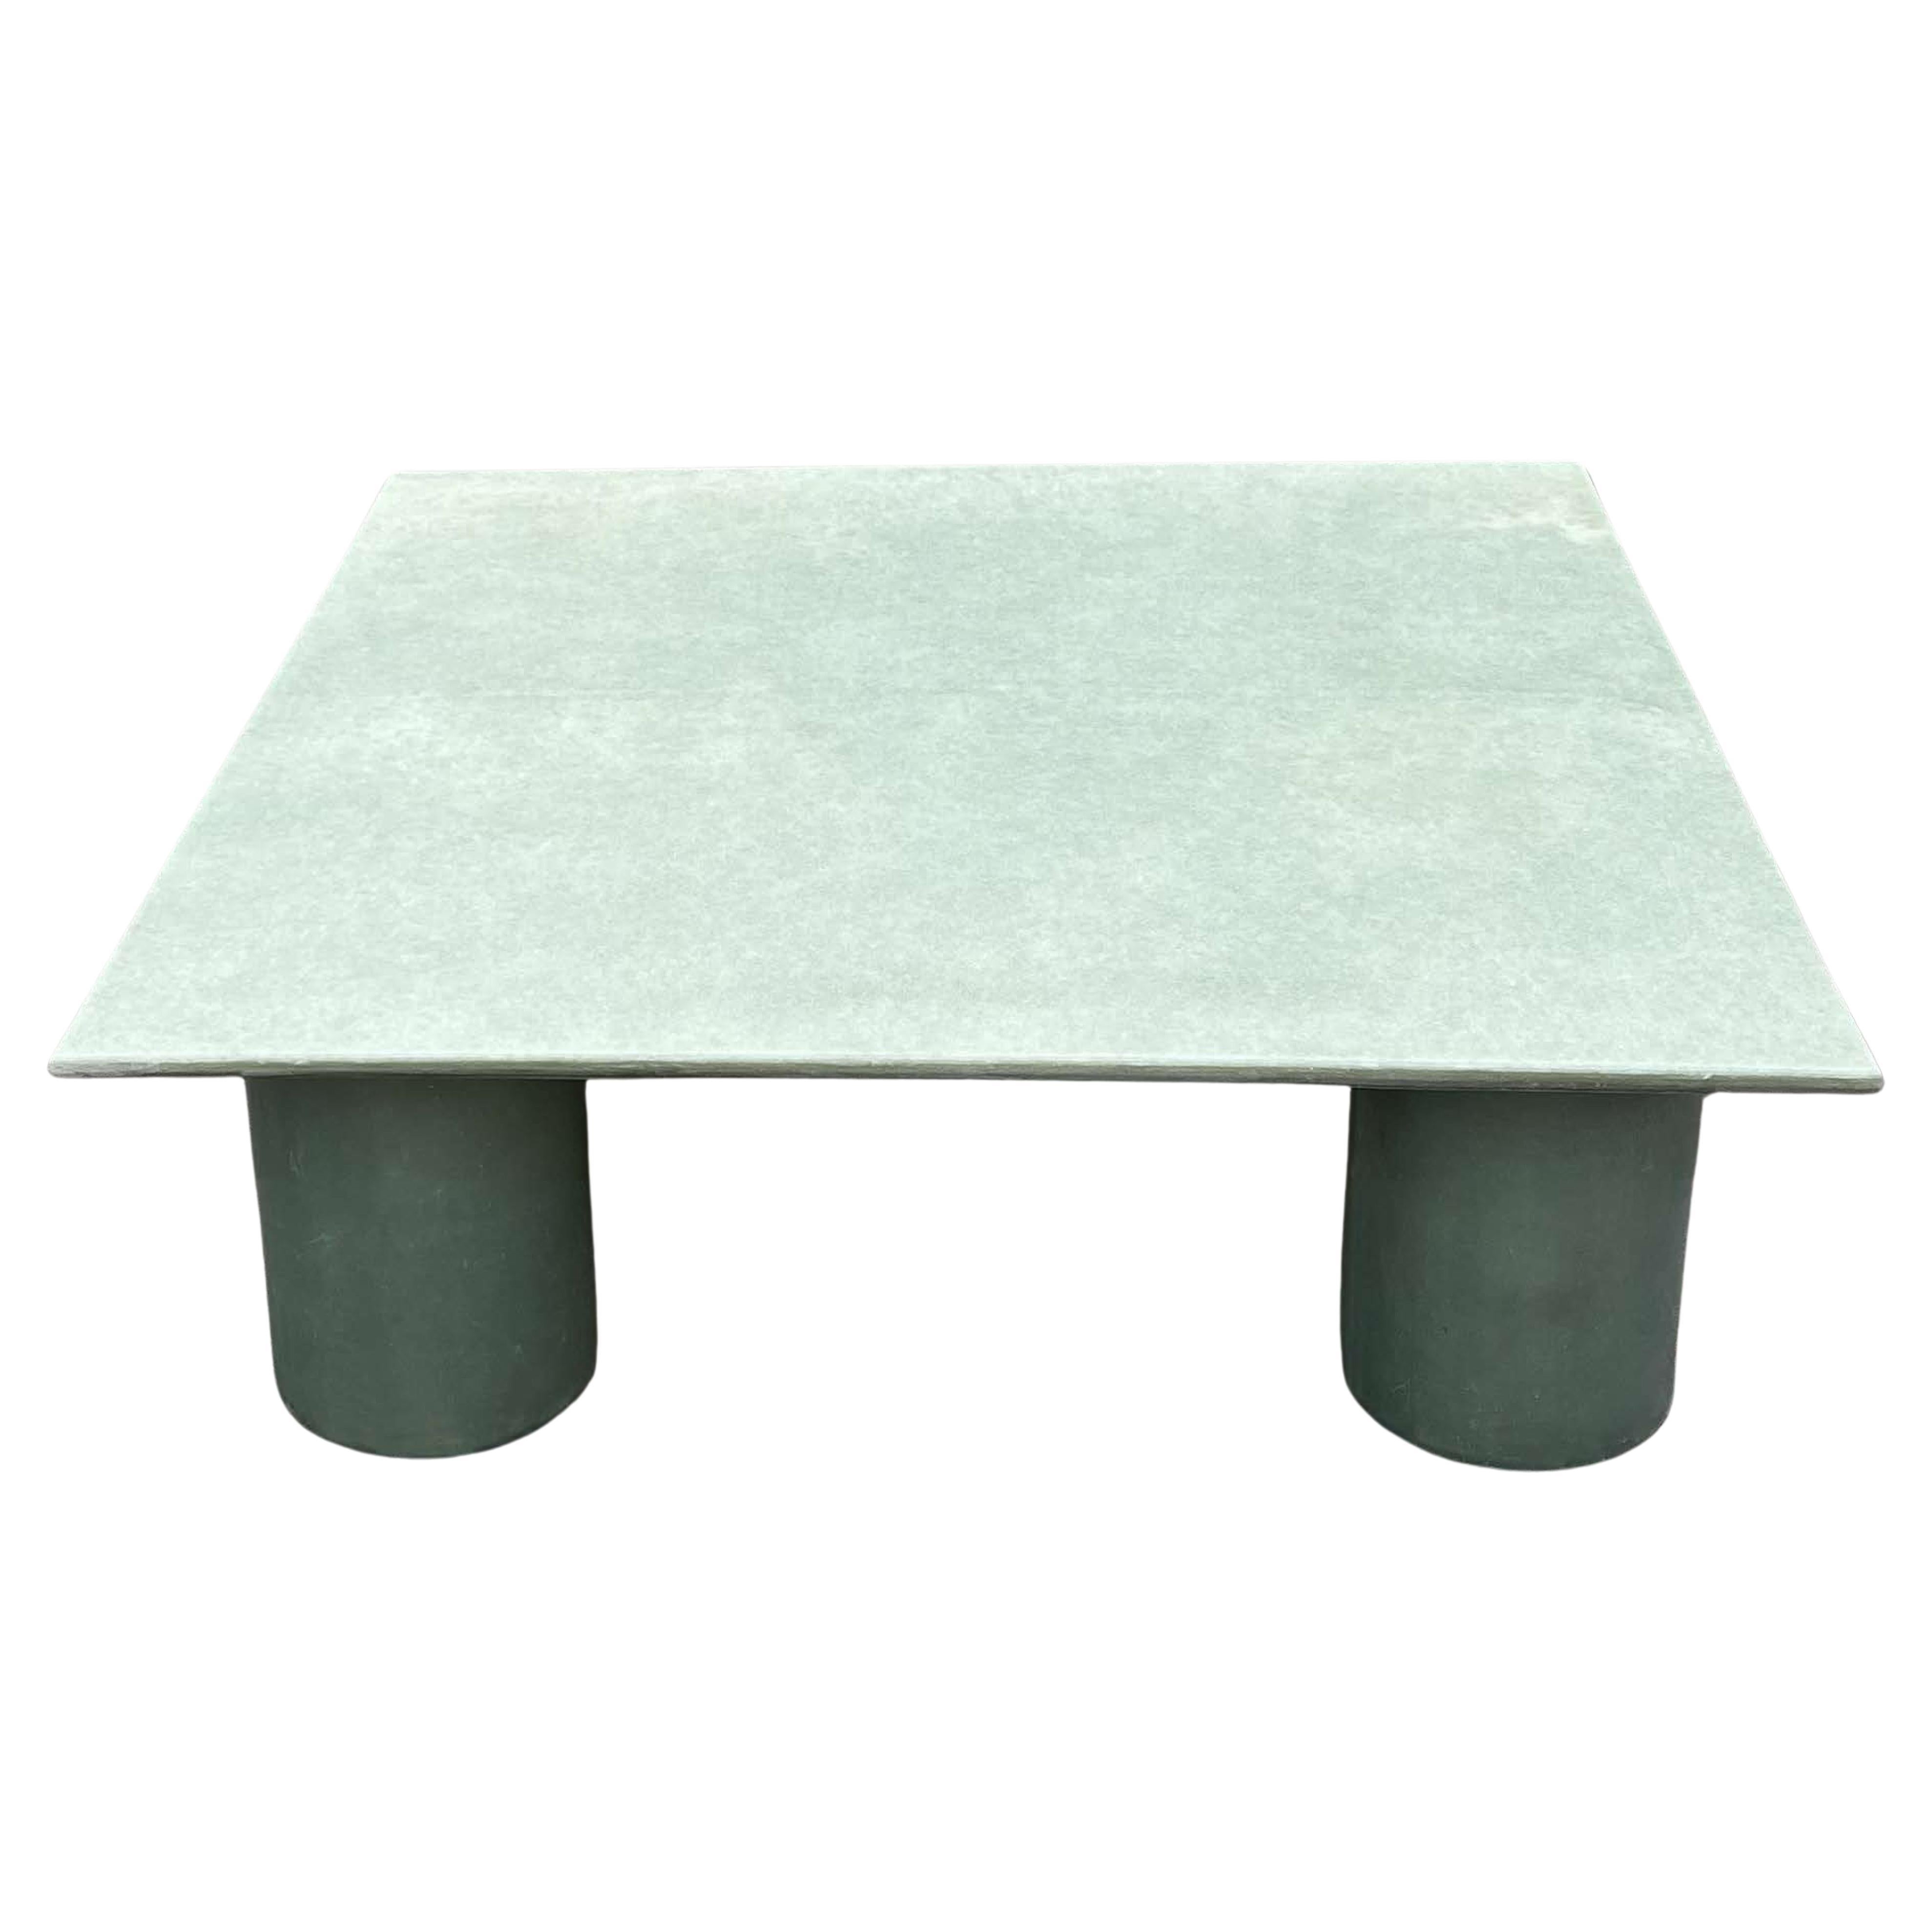 VAVA Objects Coffee Table For Sale